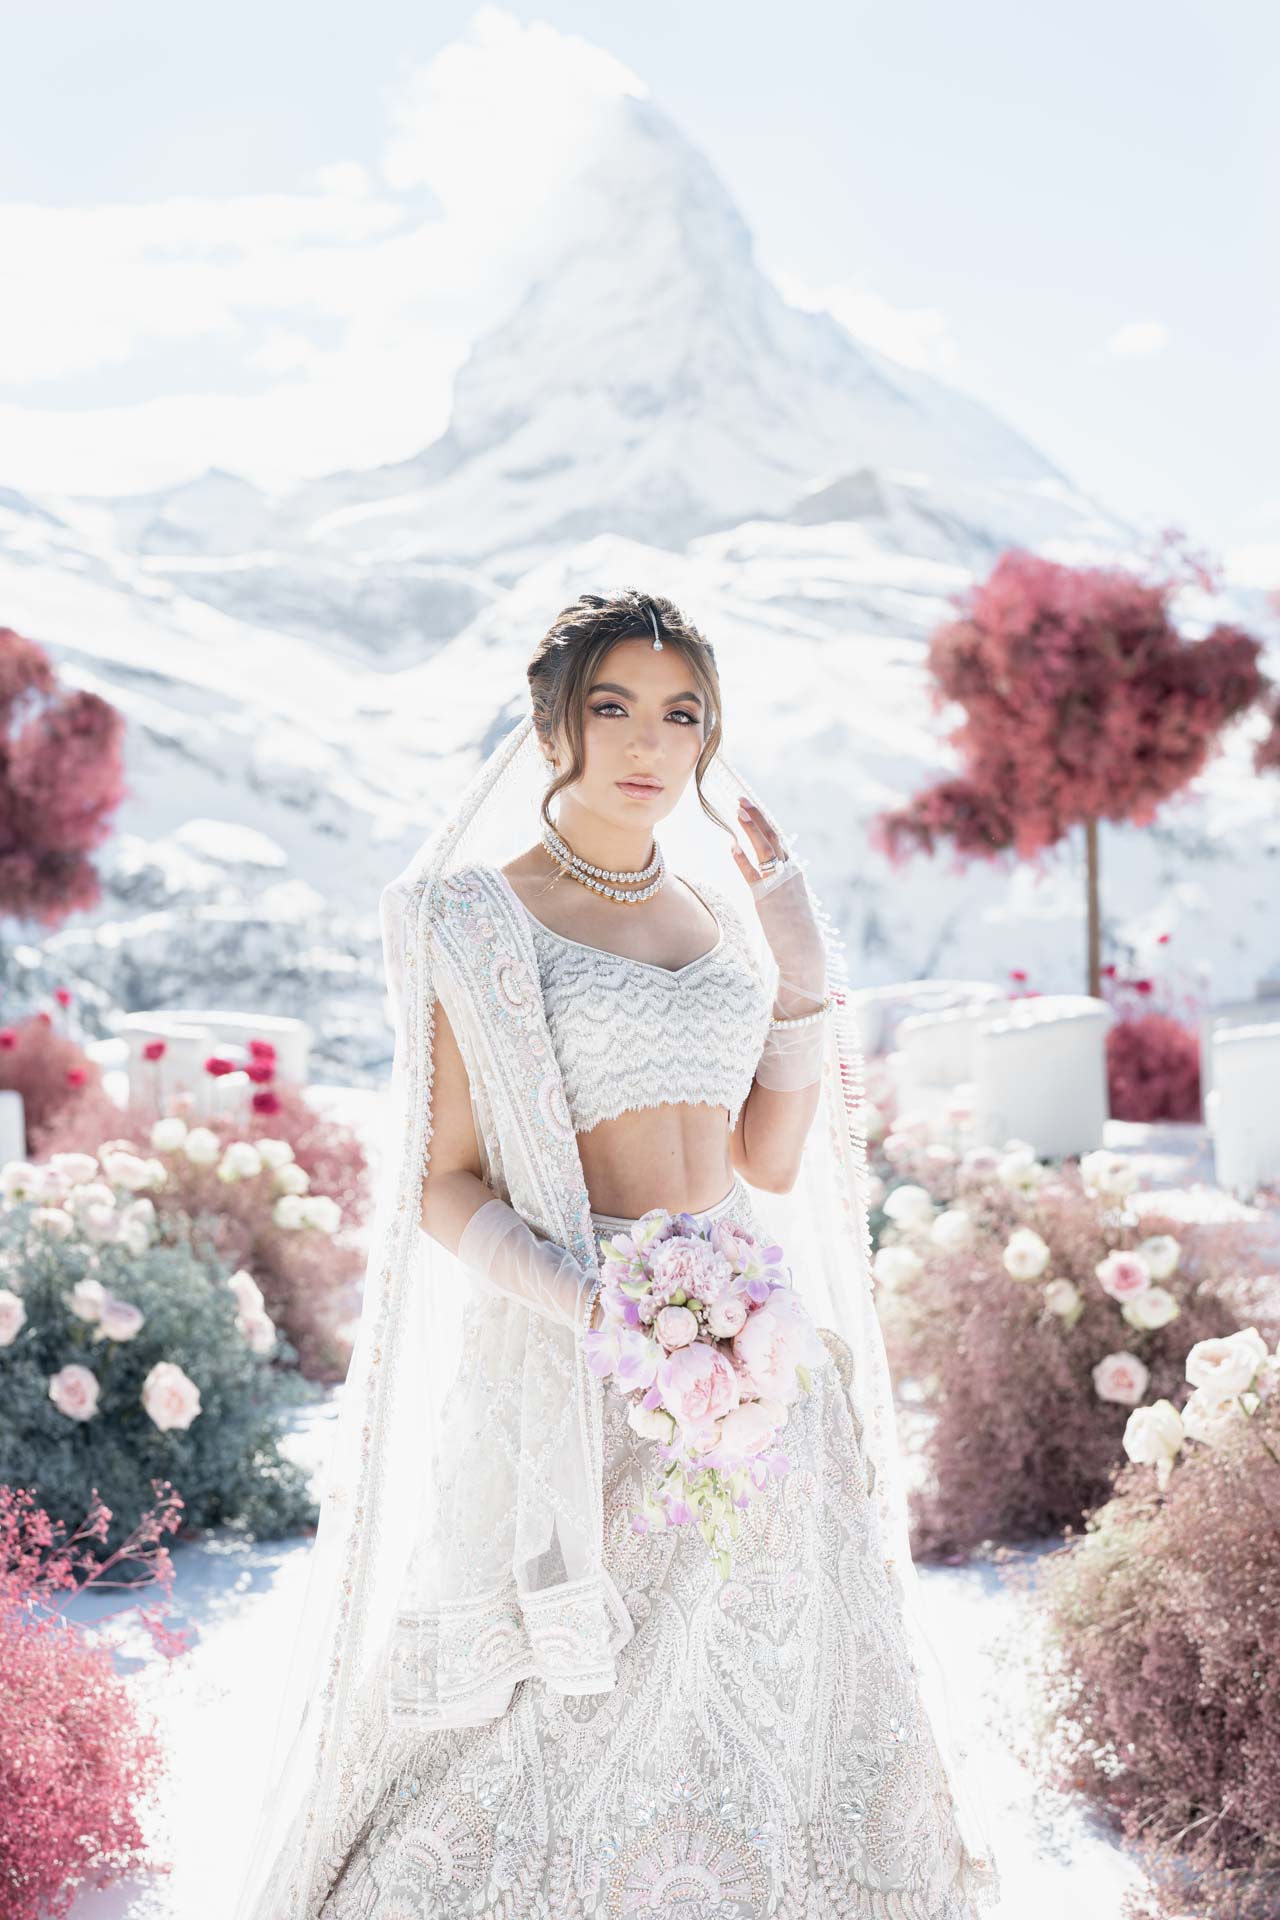 A wedding on the slopes of Matterhorn mountain, between the white of snow and the colors of India :: 45